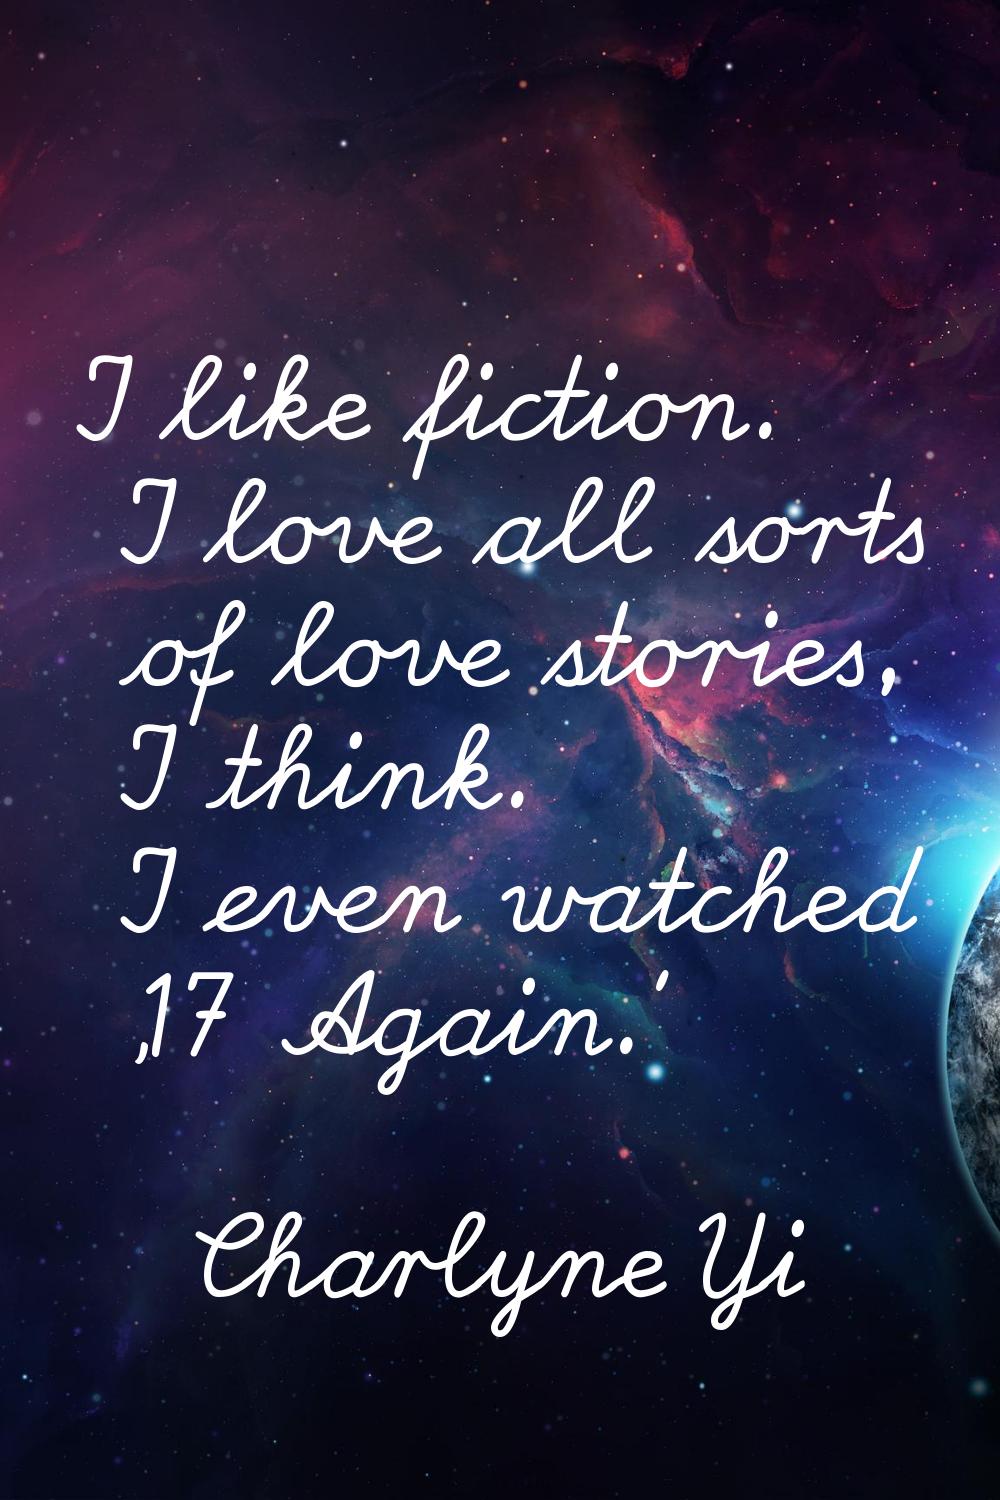 I like fiction. I love all sorts of love stories, I think. I even watched '17 Again.'